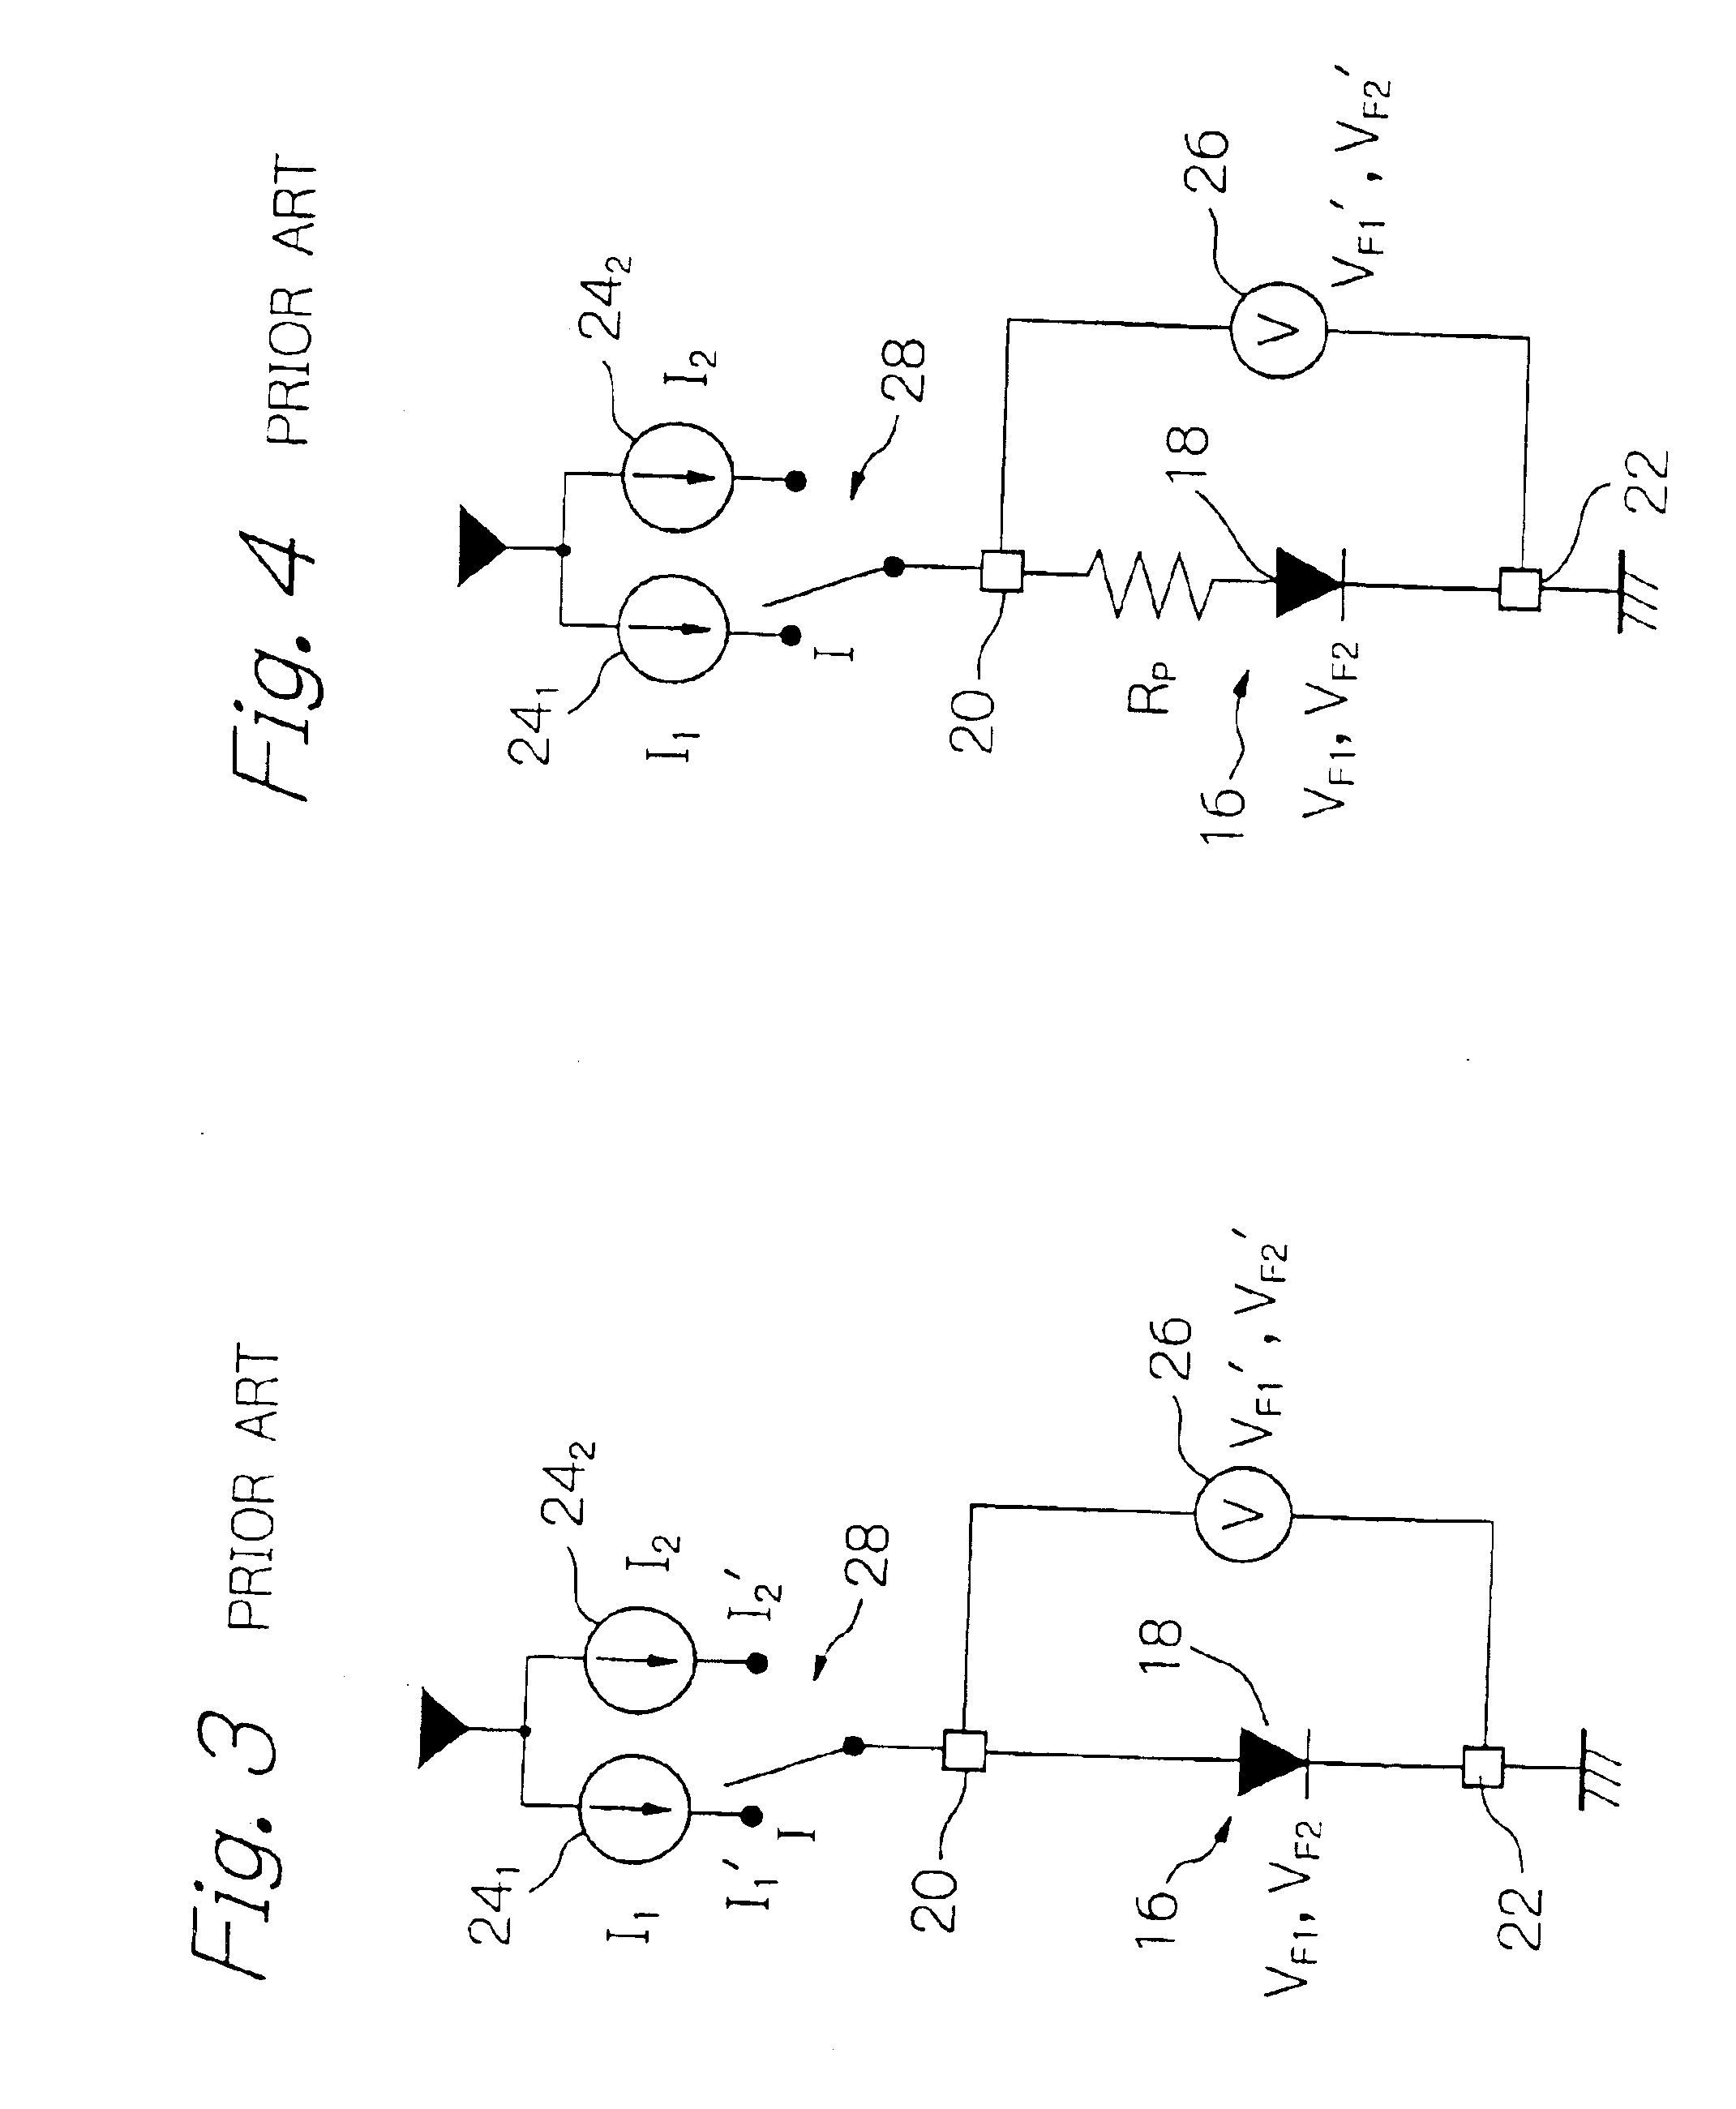 Temperature measuring sensor incorporated in semiconductor substrate, and semiconductor device containing such temperature measuring sensor